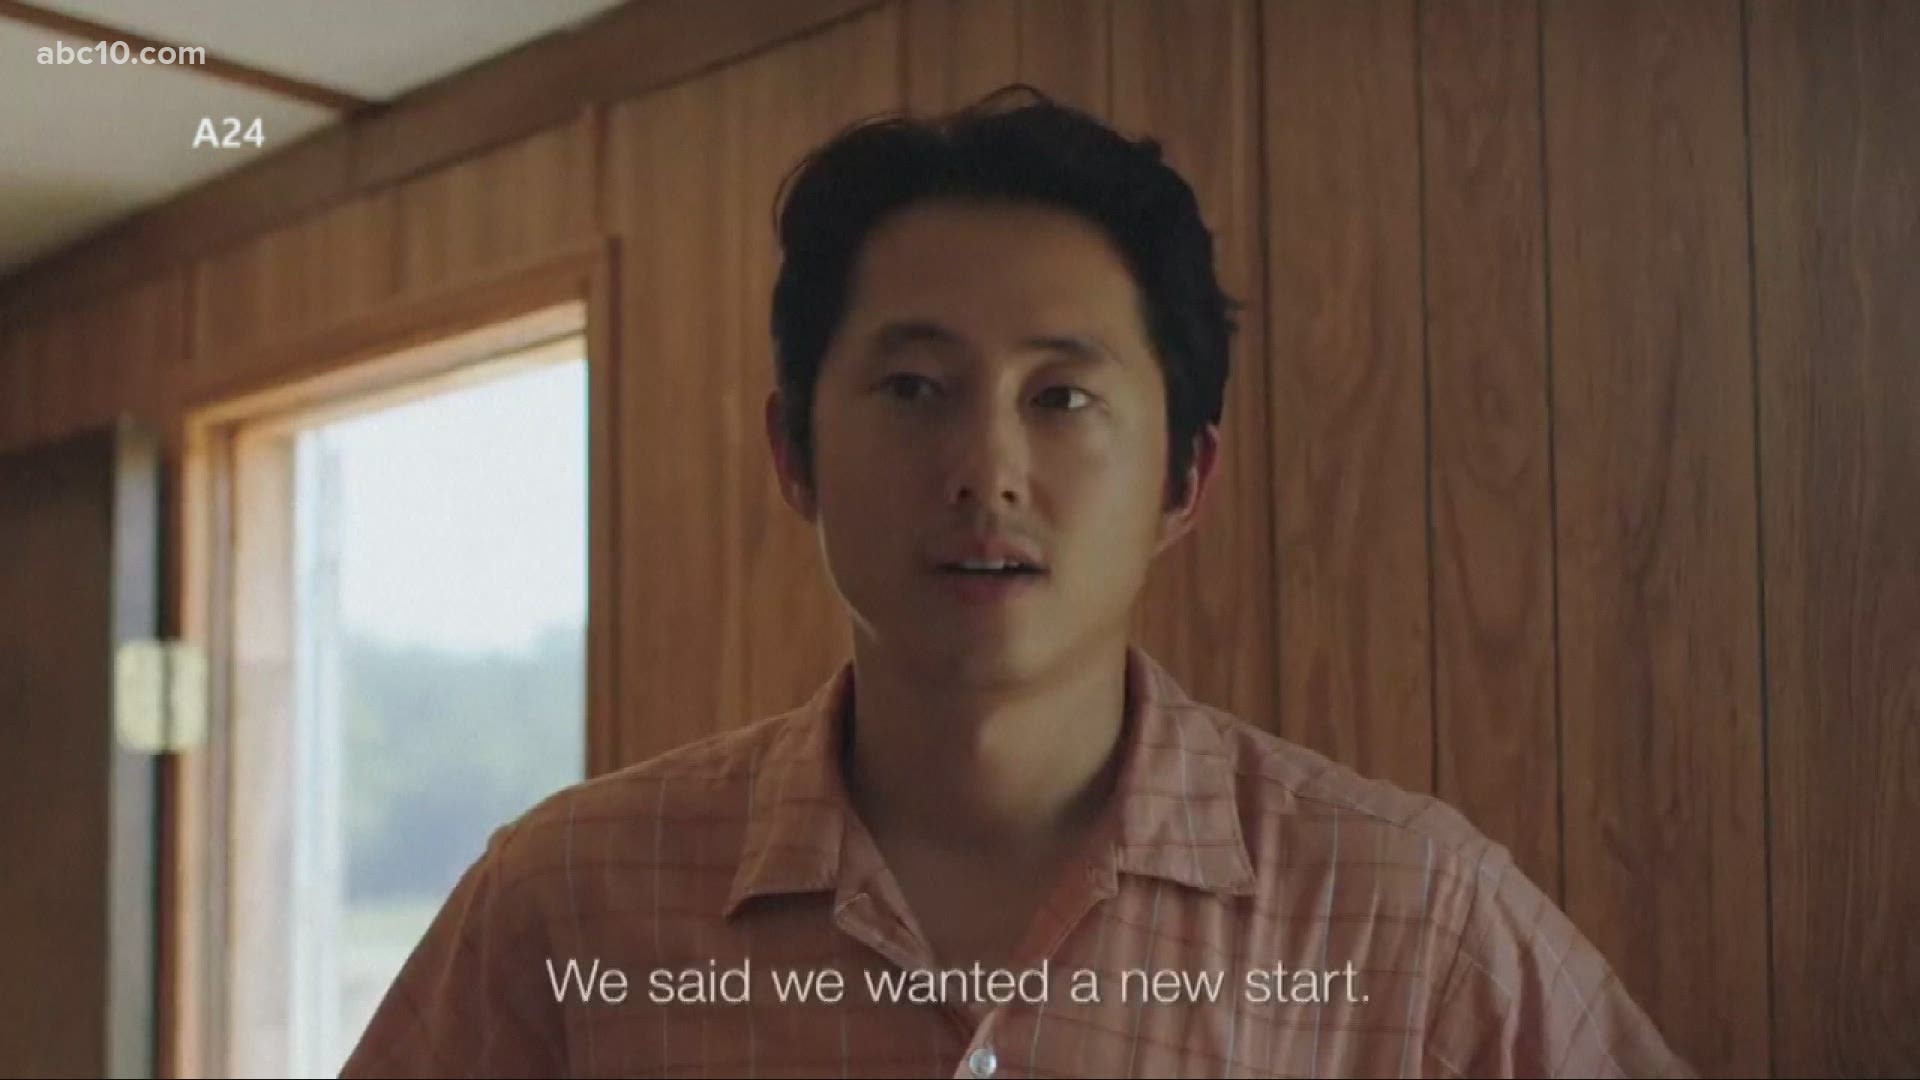 Many think the film about a Korean-American family will top the Oscars nominations this year.